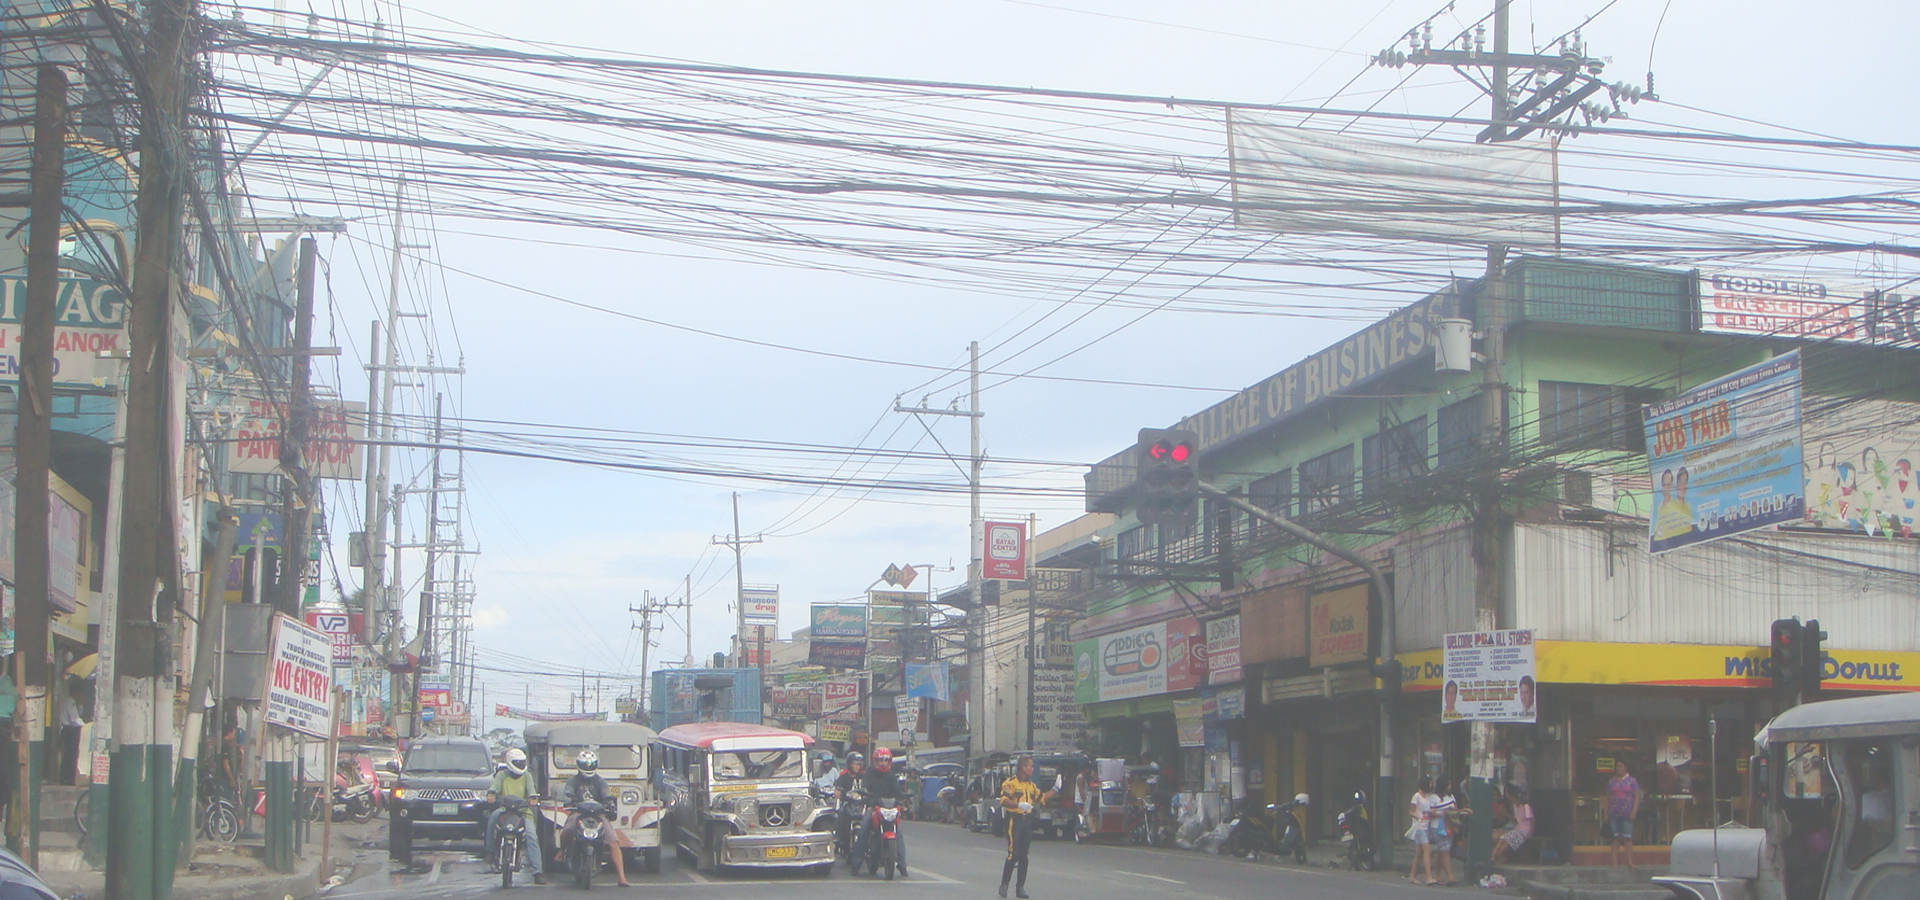 <b>Marilao, The Province of Bulacan, Central Luzon Region, Philippines</b>